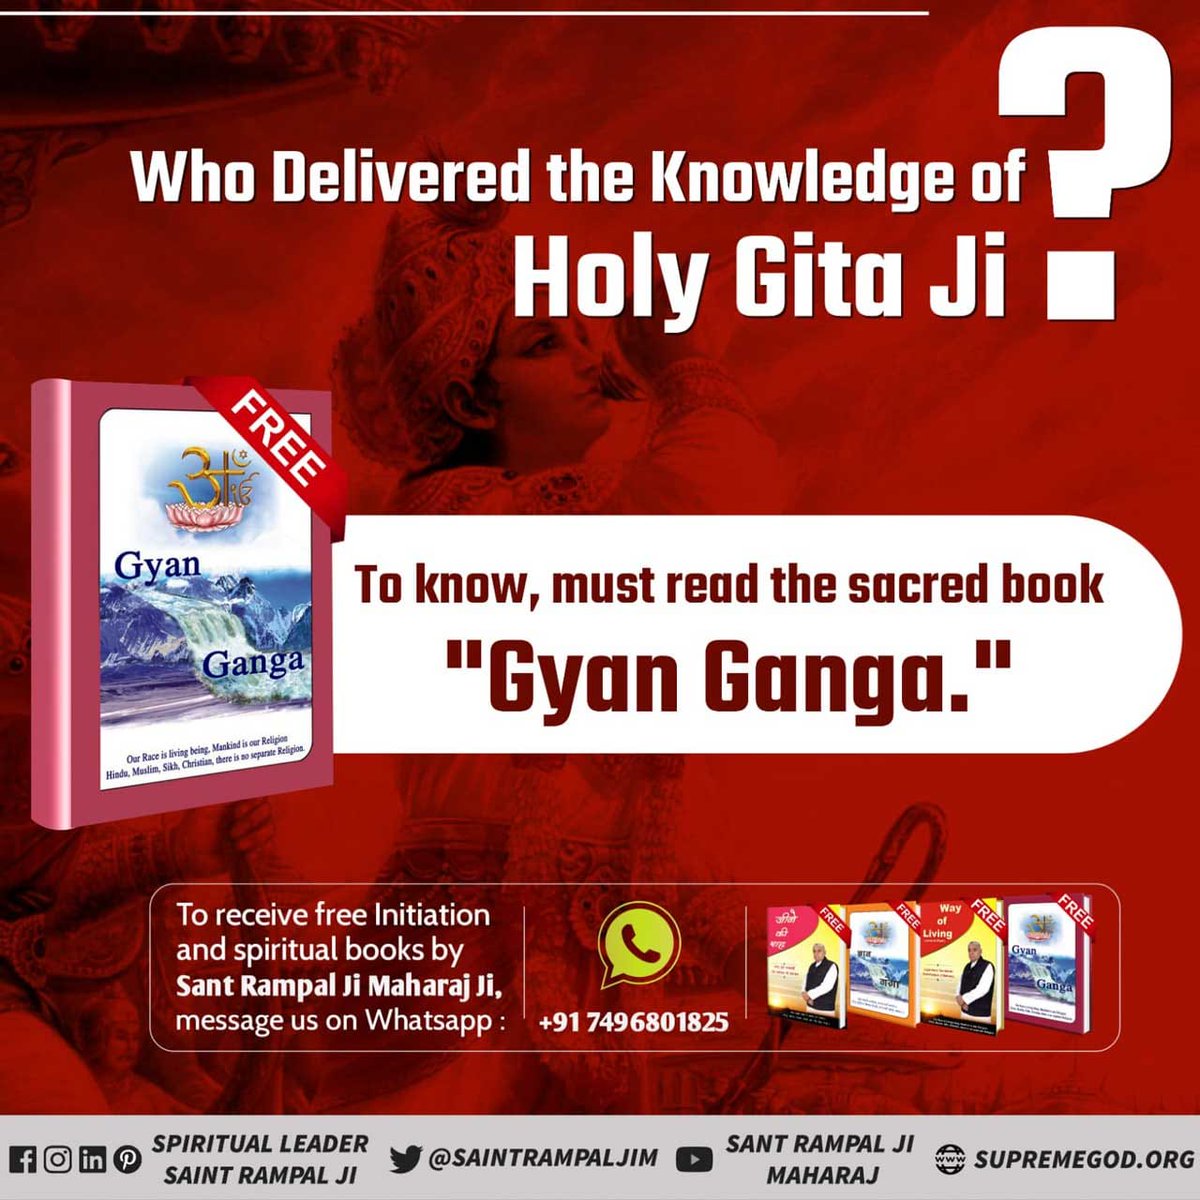 Delve into the mysteries of creation and existence with 'Gyan Ganga.' Explore the profound truths behind the origins of the universe and gain insights from ancient wisdom.

To get this book for free, Whatsapp us (+91 7496801825) your name, full address, pincode and mobile number